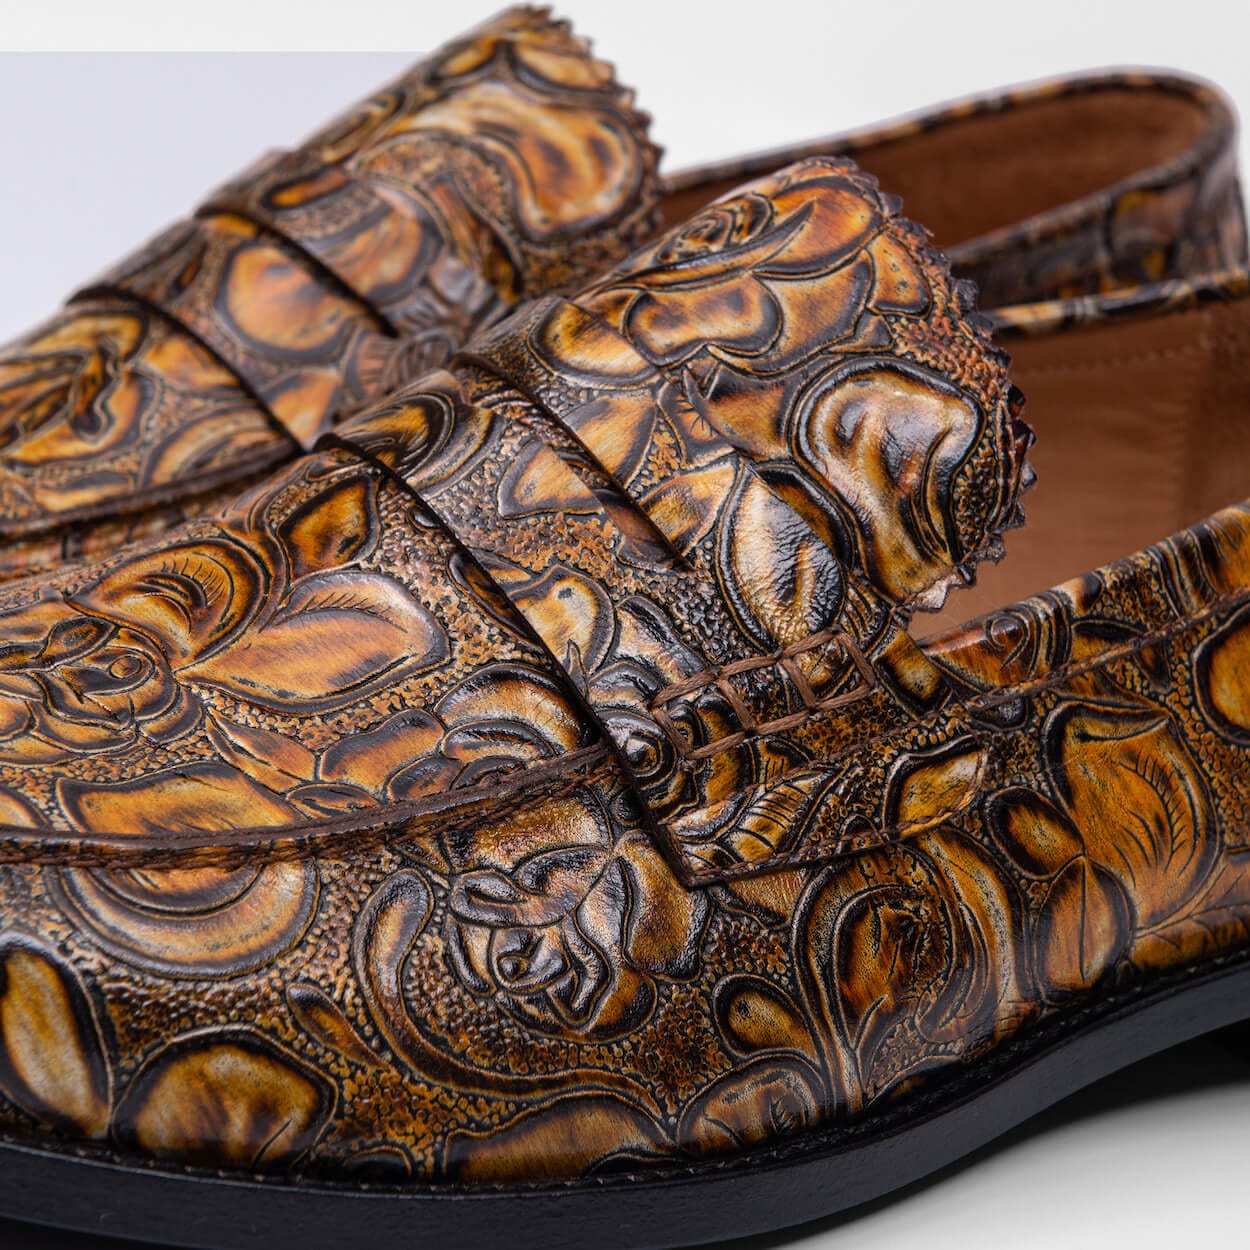 Abe Goldenrod Leather Penny Loafers